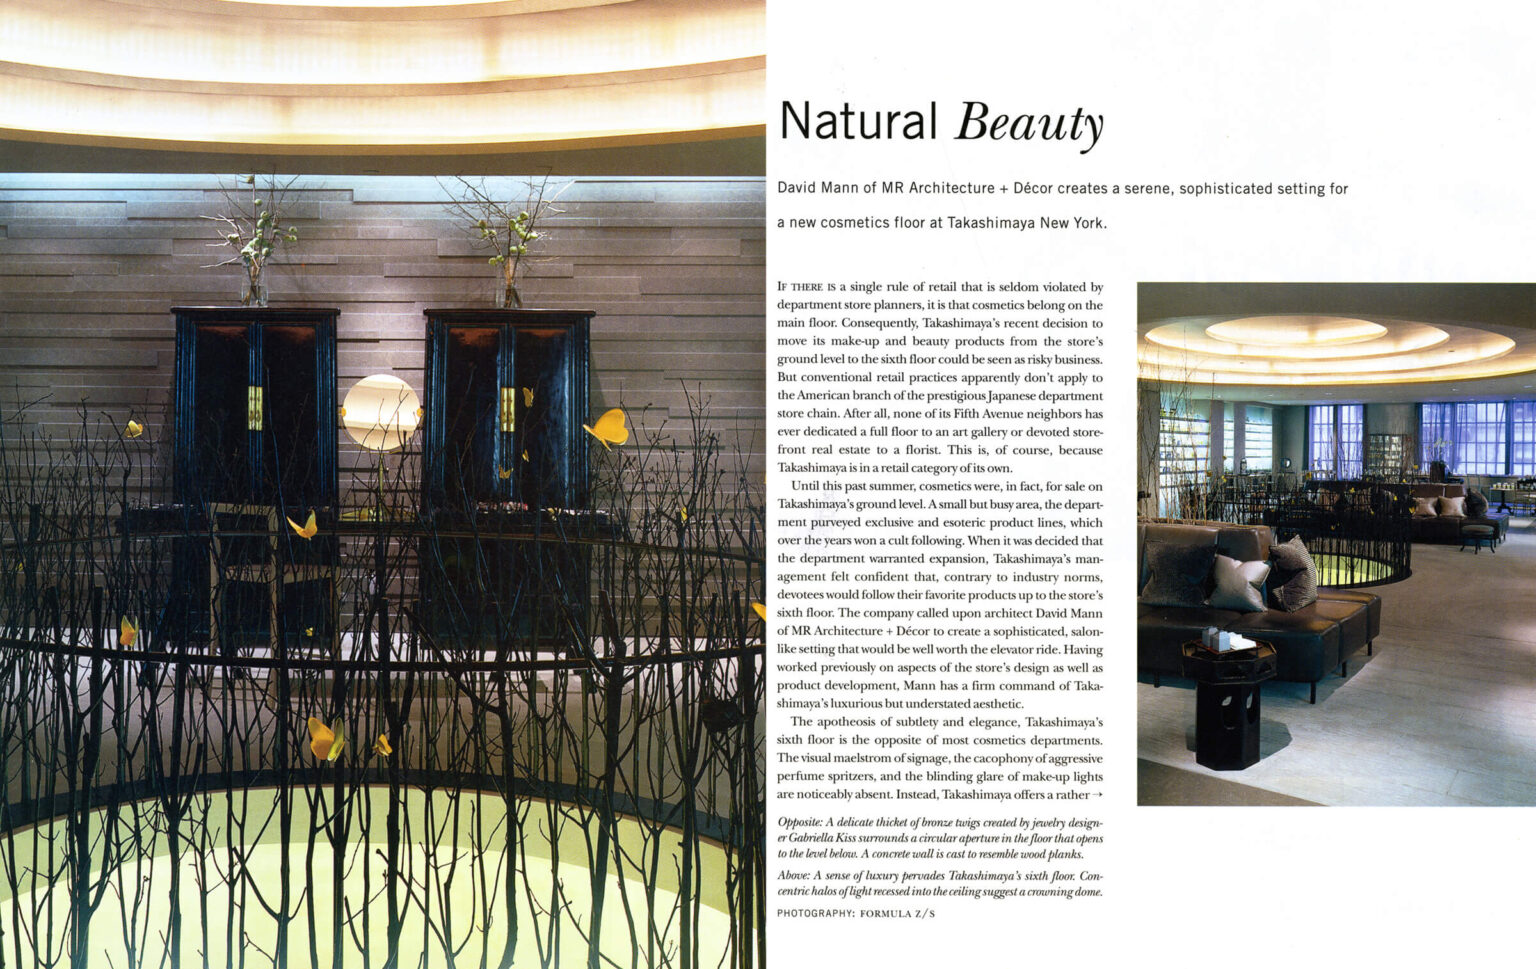 A double page spread of a story titled Natural Beauty of the Takashimaya store in NYC by MR Architecture + Decor in Interior Design magazine.